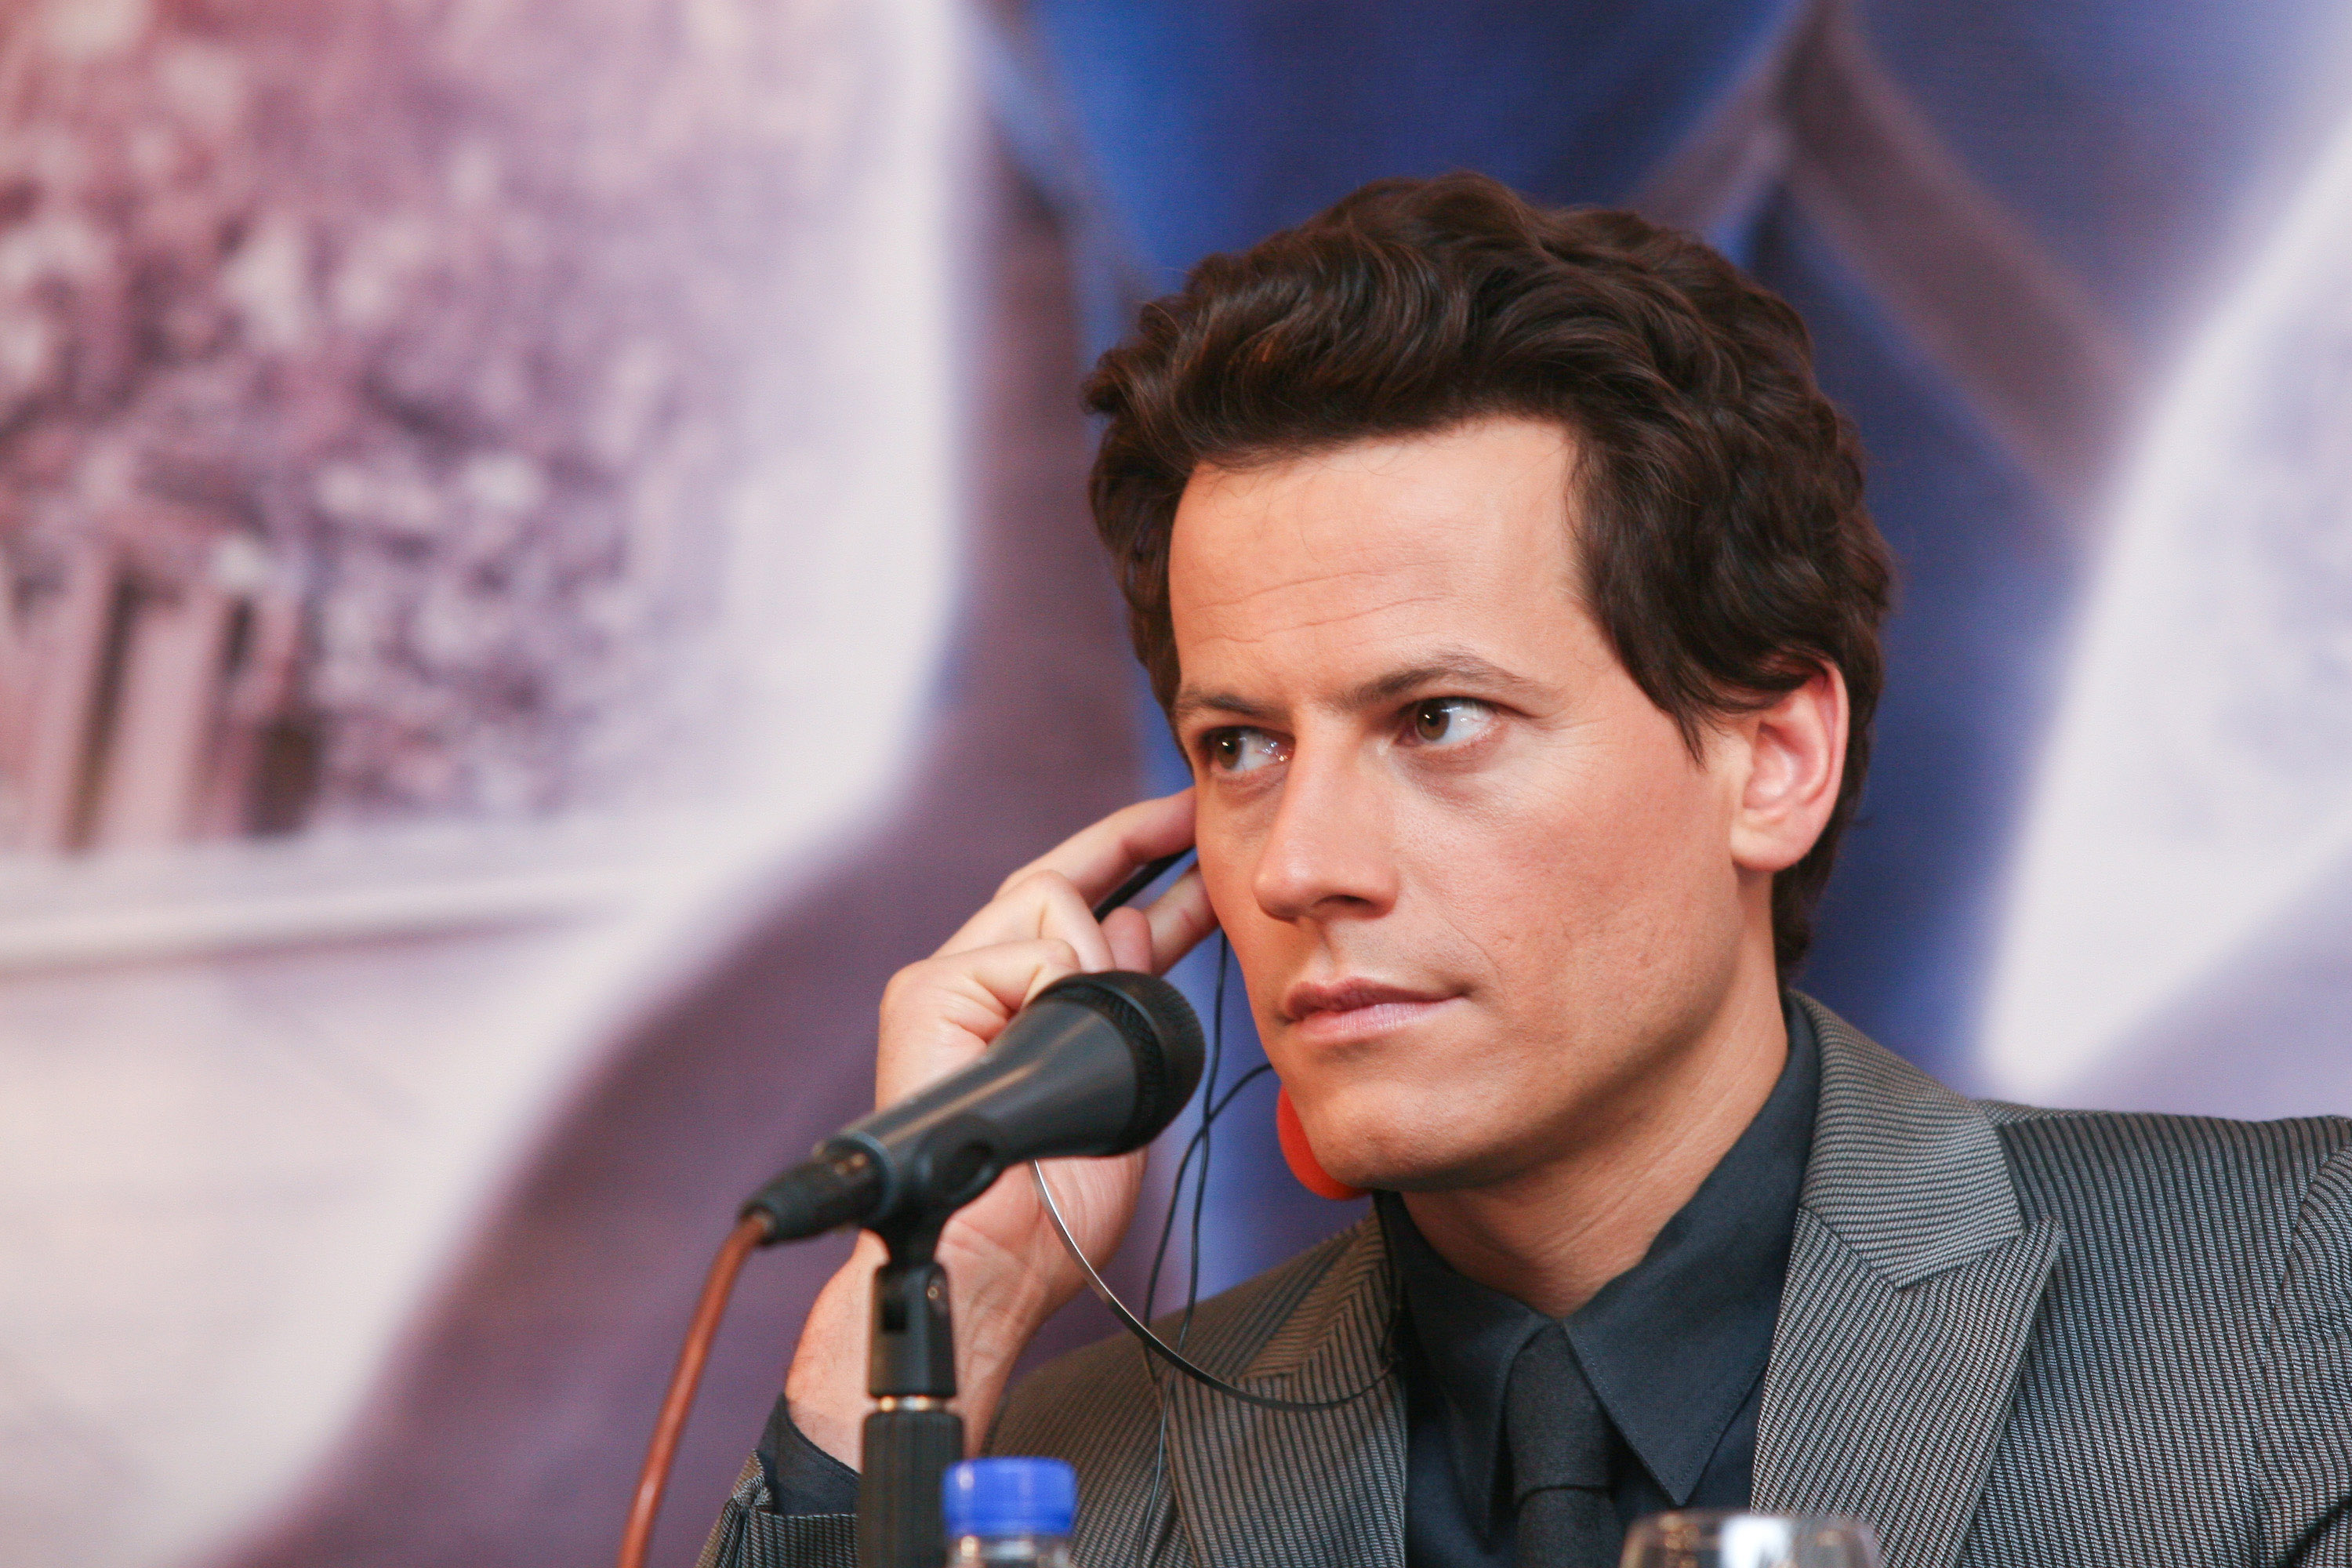 Ioan Gruffudd, who played Reed Richards in 'Fantastic Four,' the character who may be in 'Doctor Strange in the Multiverse of Madness,' wears a gray striped suit over a dark blue button-up shirt and tie.